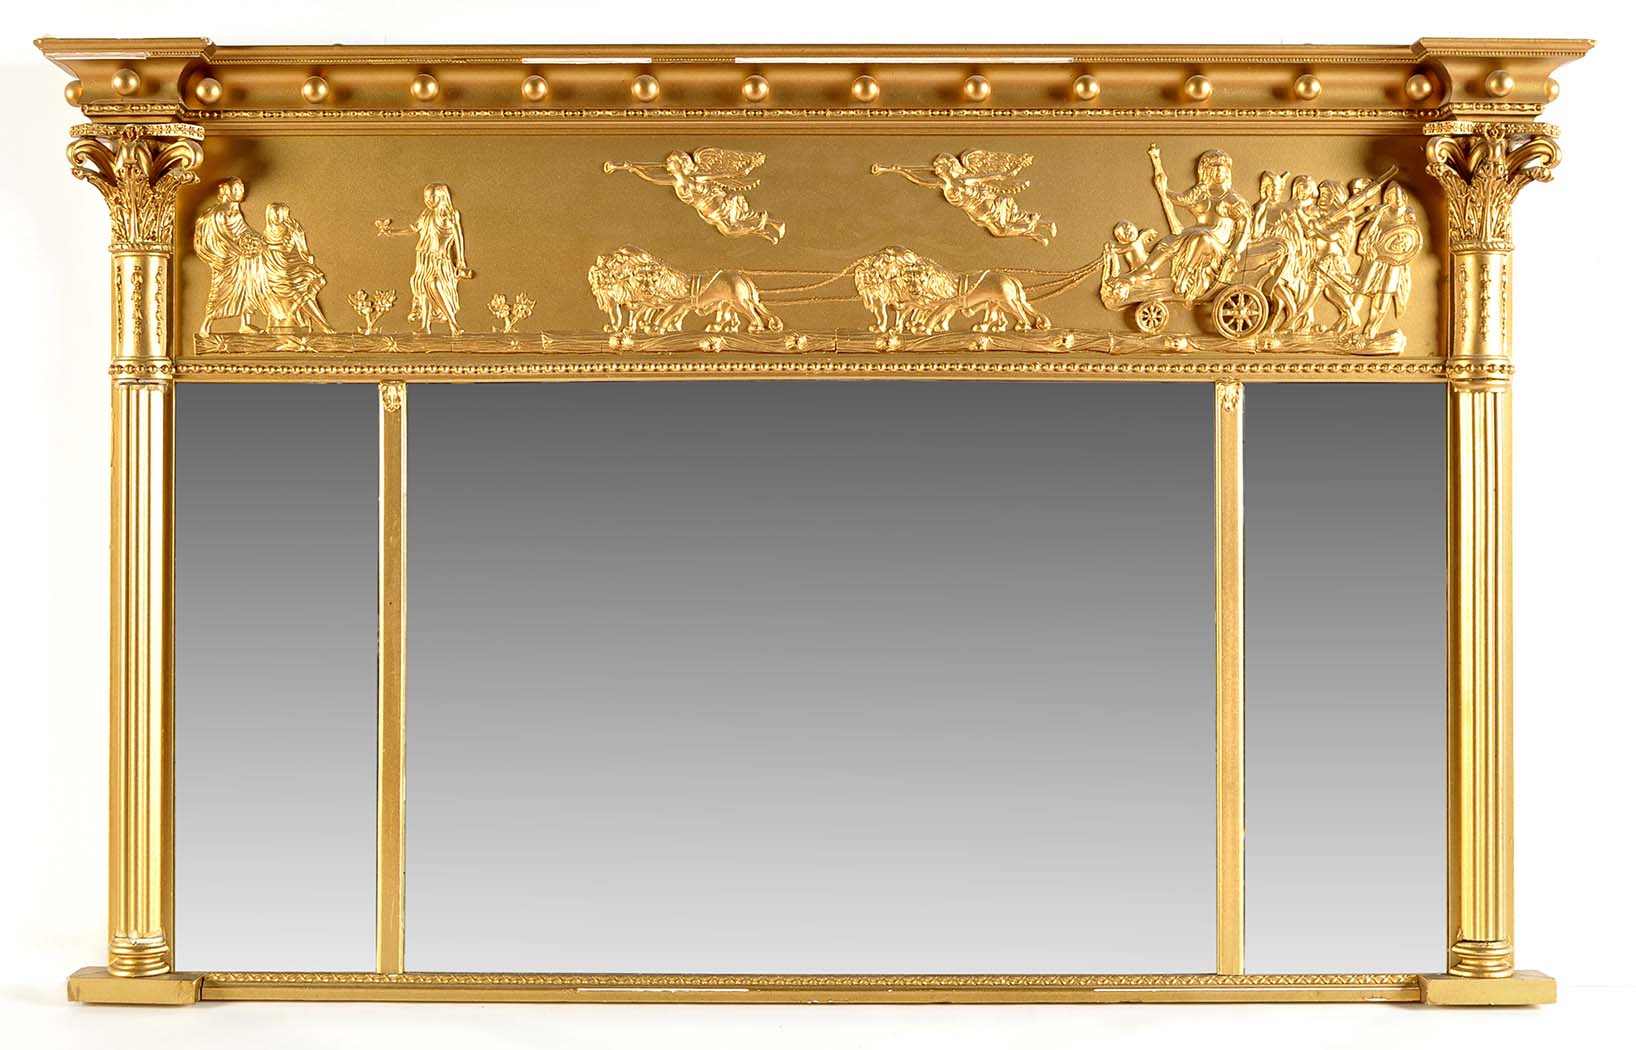 A Regency style gilt gesso breakfront overmantel mirror, with cannon ball decoration to the